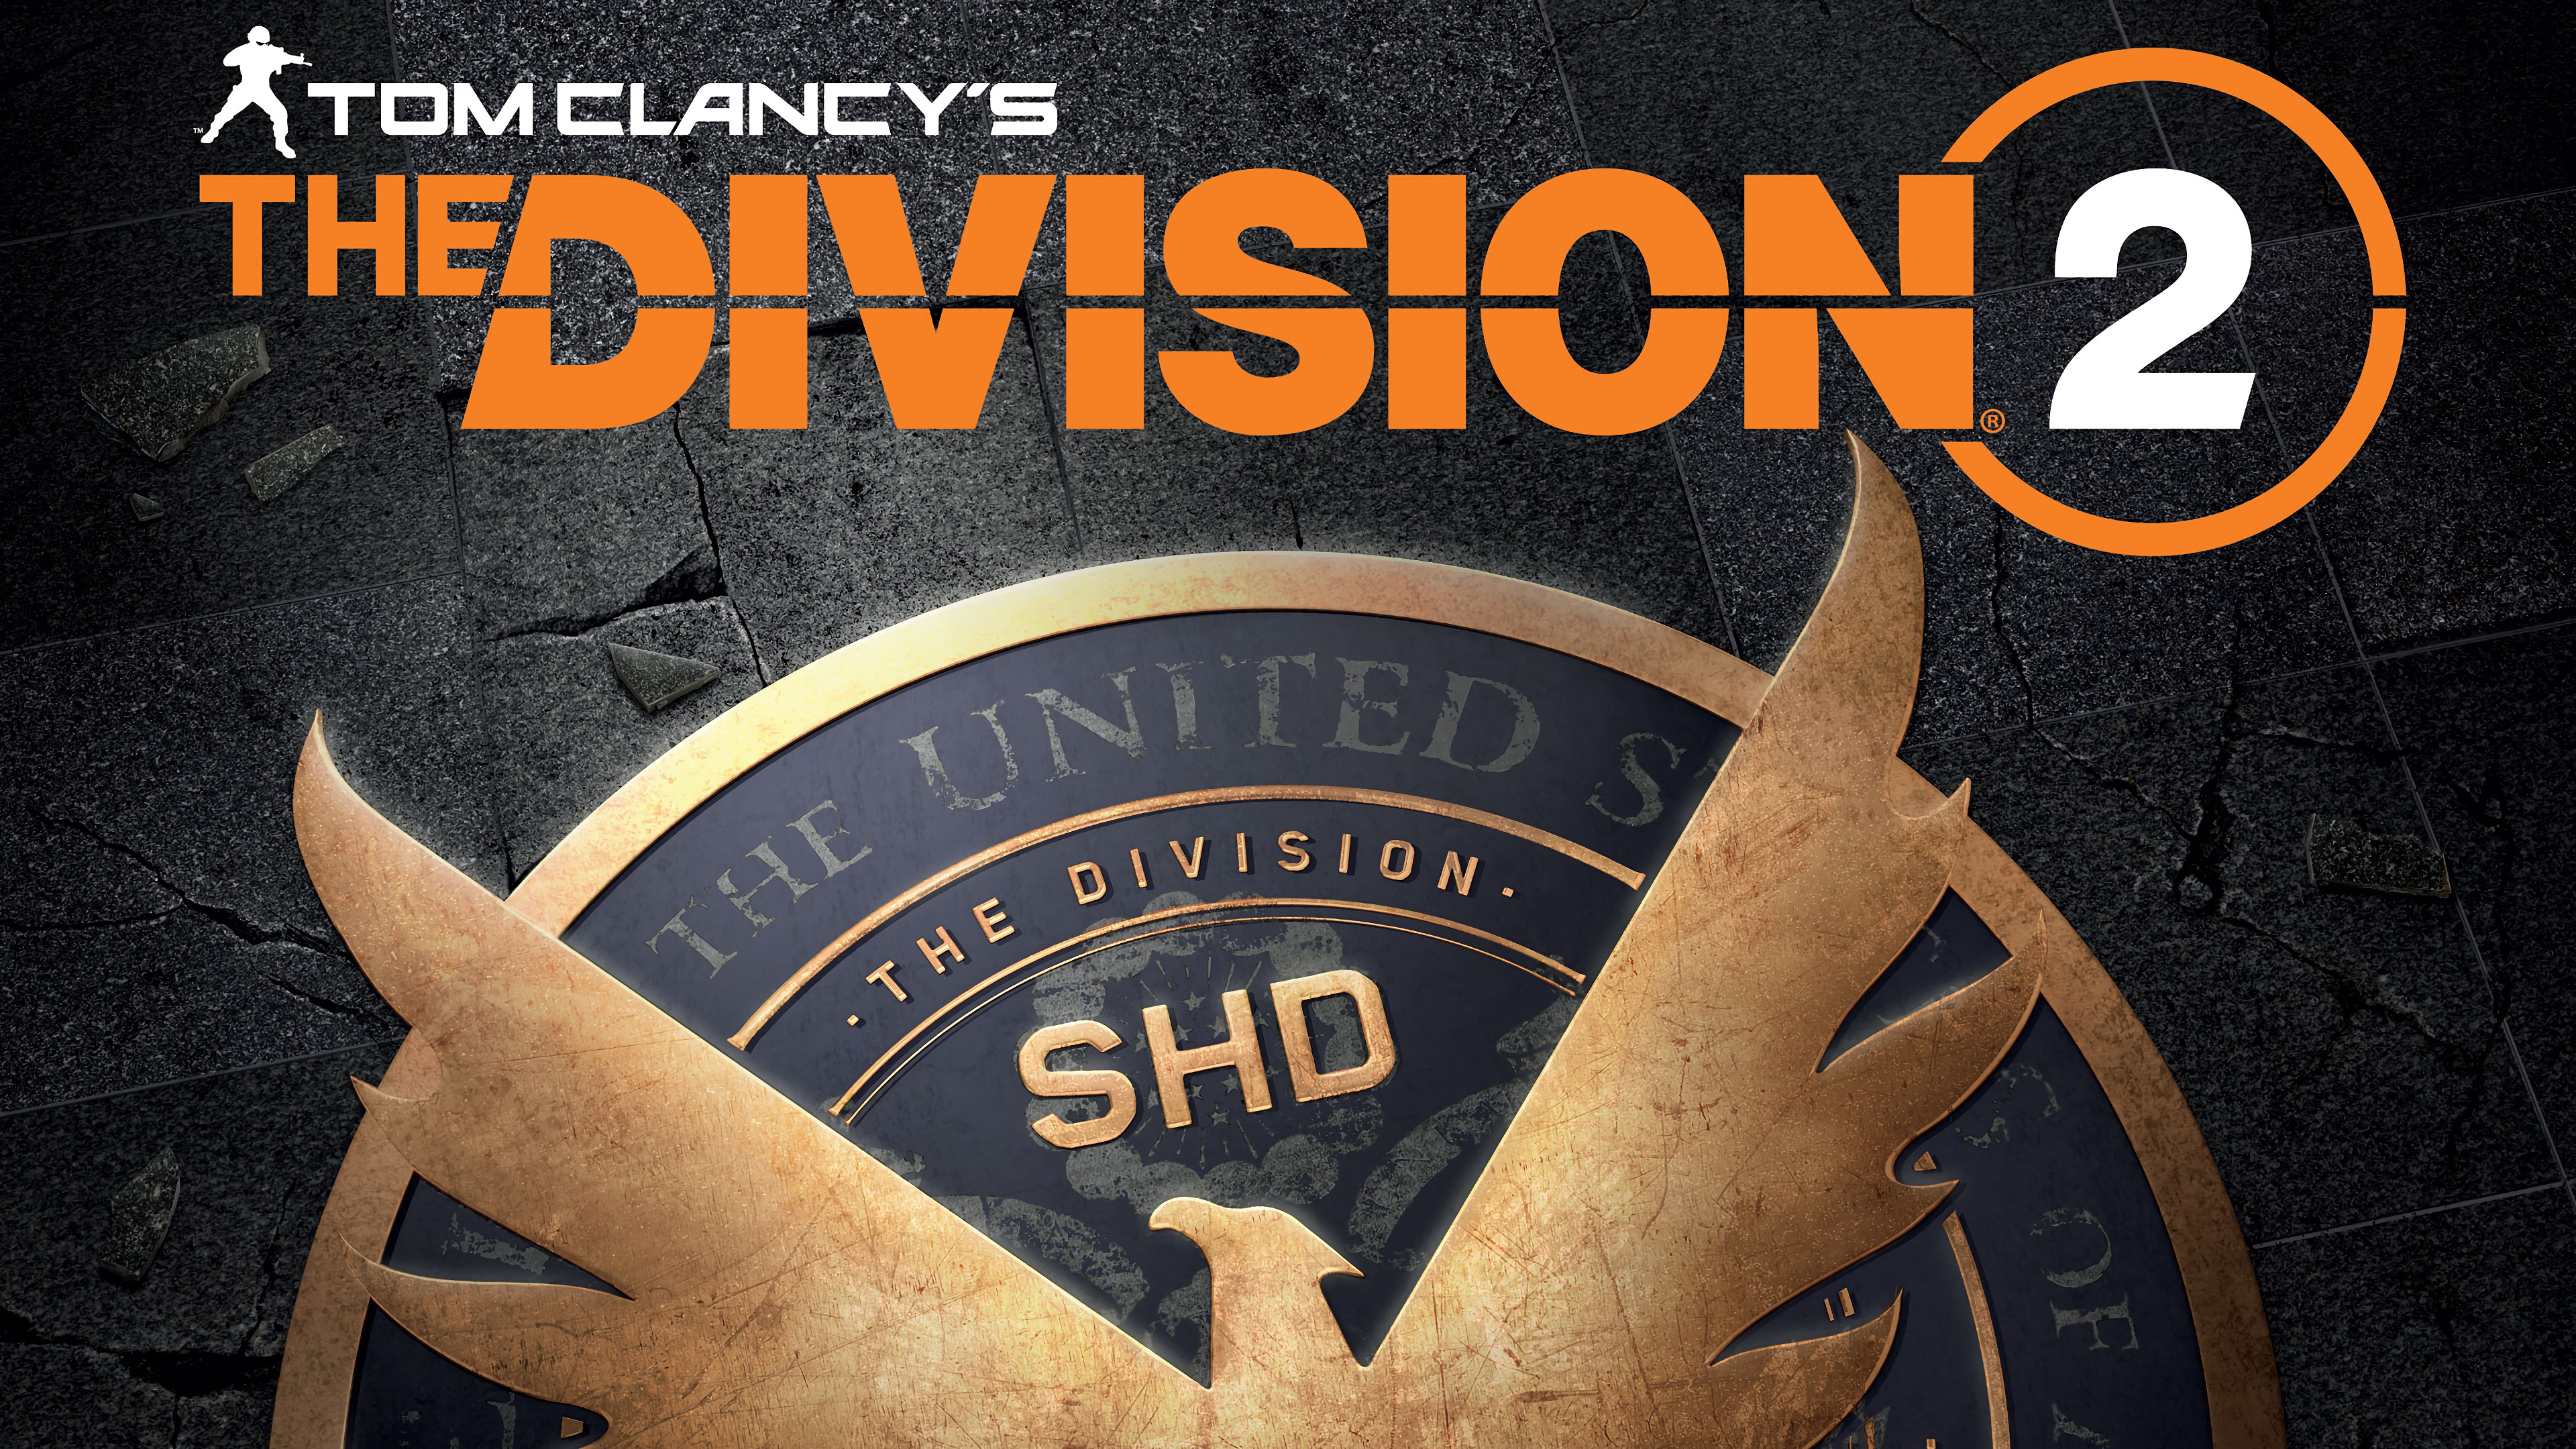 Tom clancy s the division gold edition в стиме фото 113